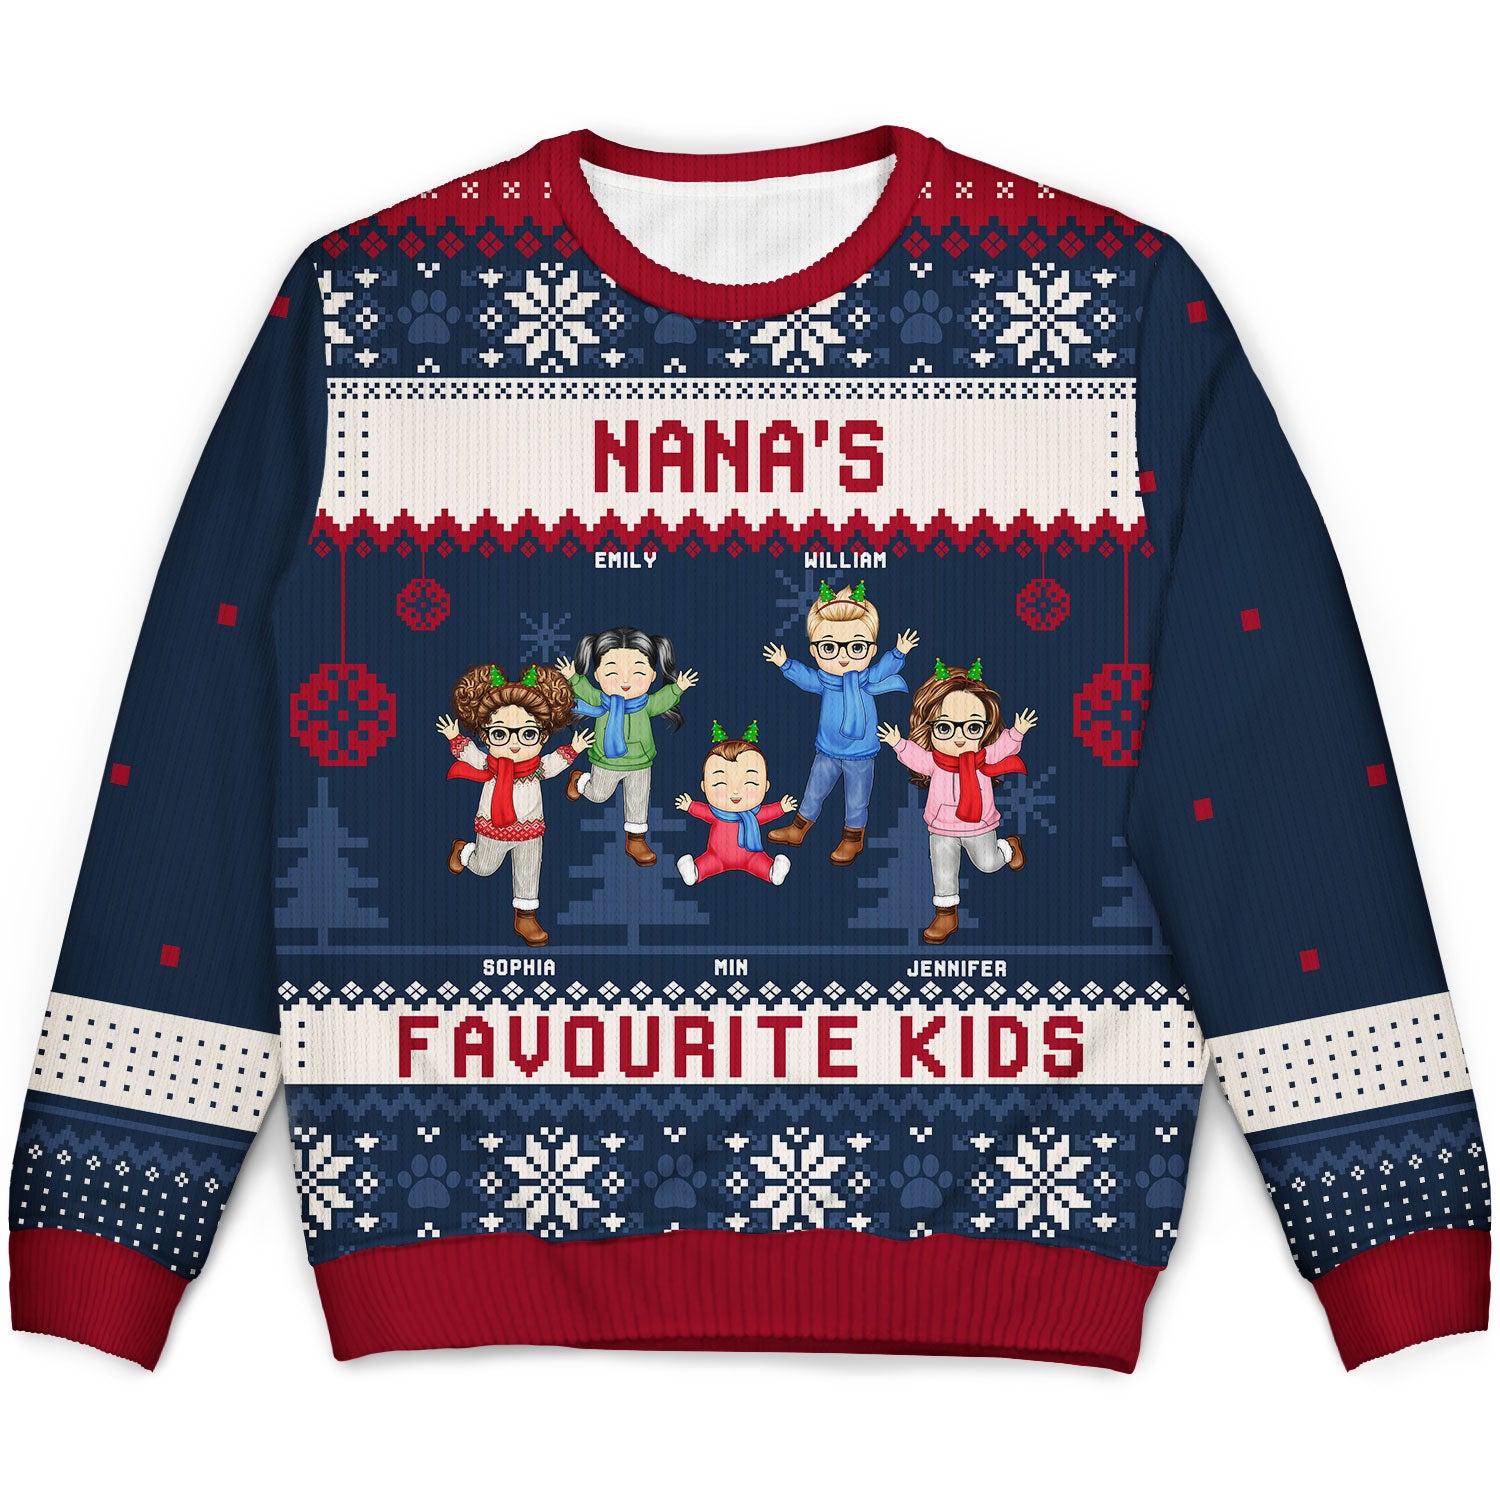 Nana's Favourite Kids - Christmas Gift For Grandma, Grandmother, Grandpa, Grandfather, Grandparents - Personalized Unisex Ugly Sweater